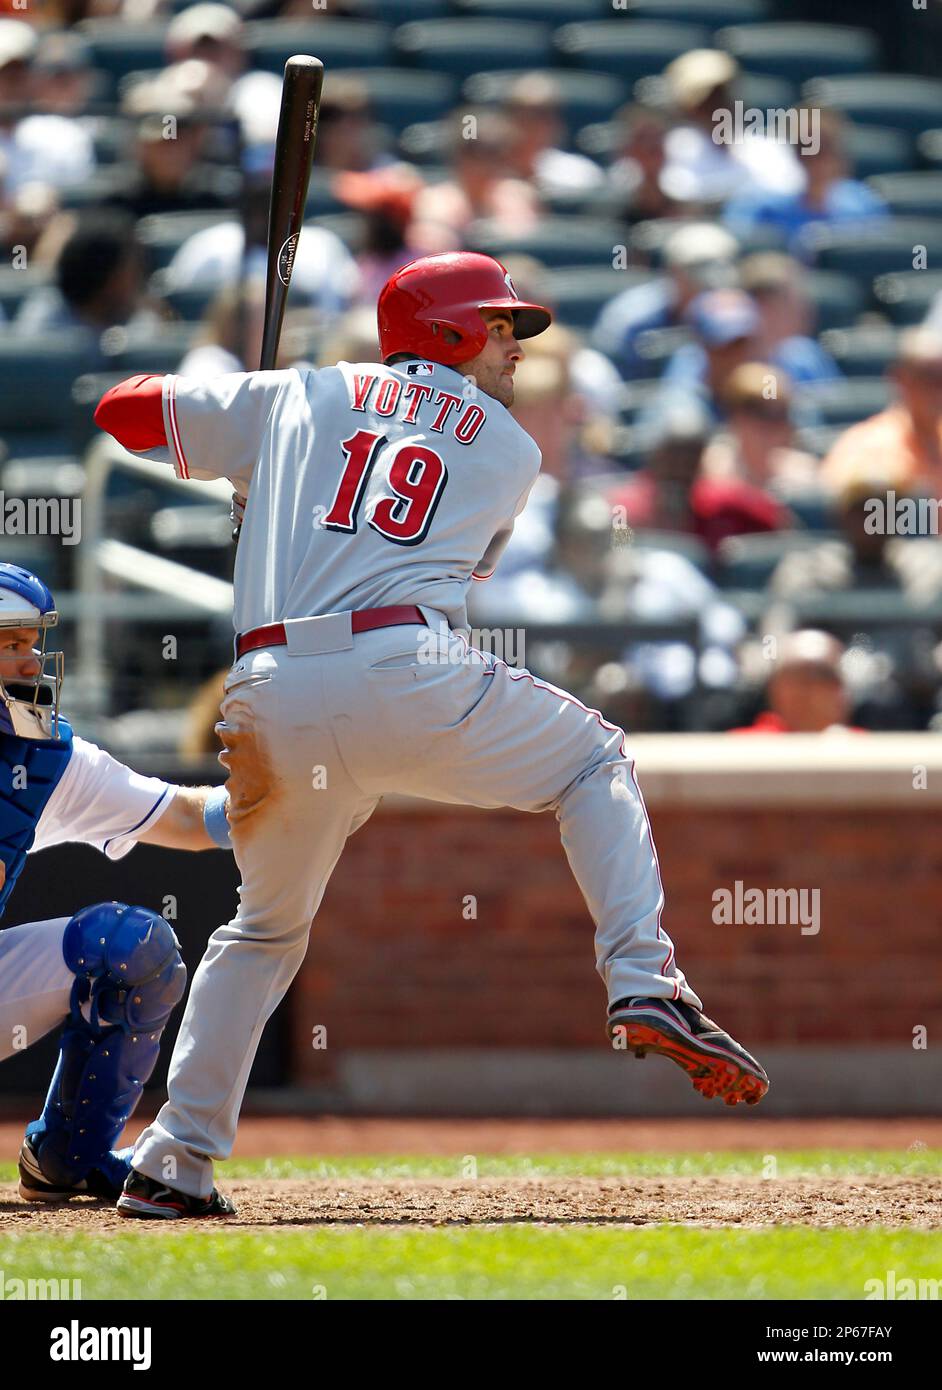 Cincinnati Reds Joey Votto during a game against the New York Mets at Citi  Field in Flushing Meadows, NY. on June 17, 2012.(AP PhotoTom DiPace Stock  Photo - Alamy